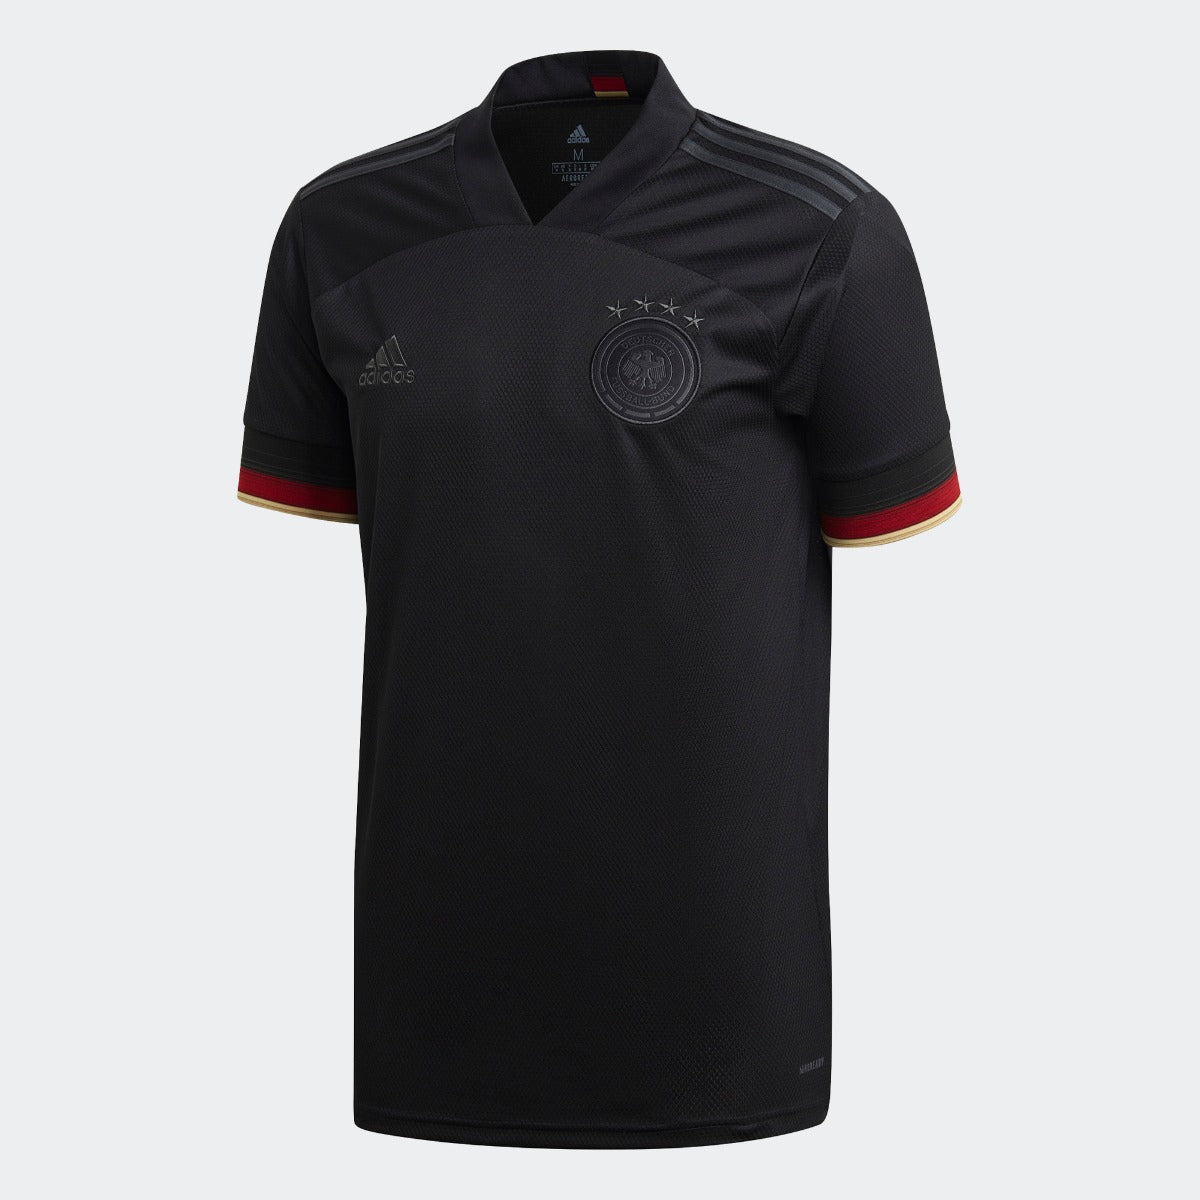 Adidas 2021-22 Germany Away Jersey - Black (Front)